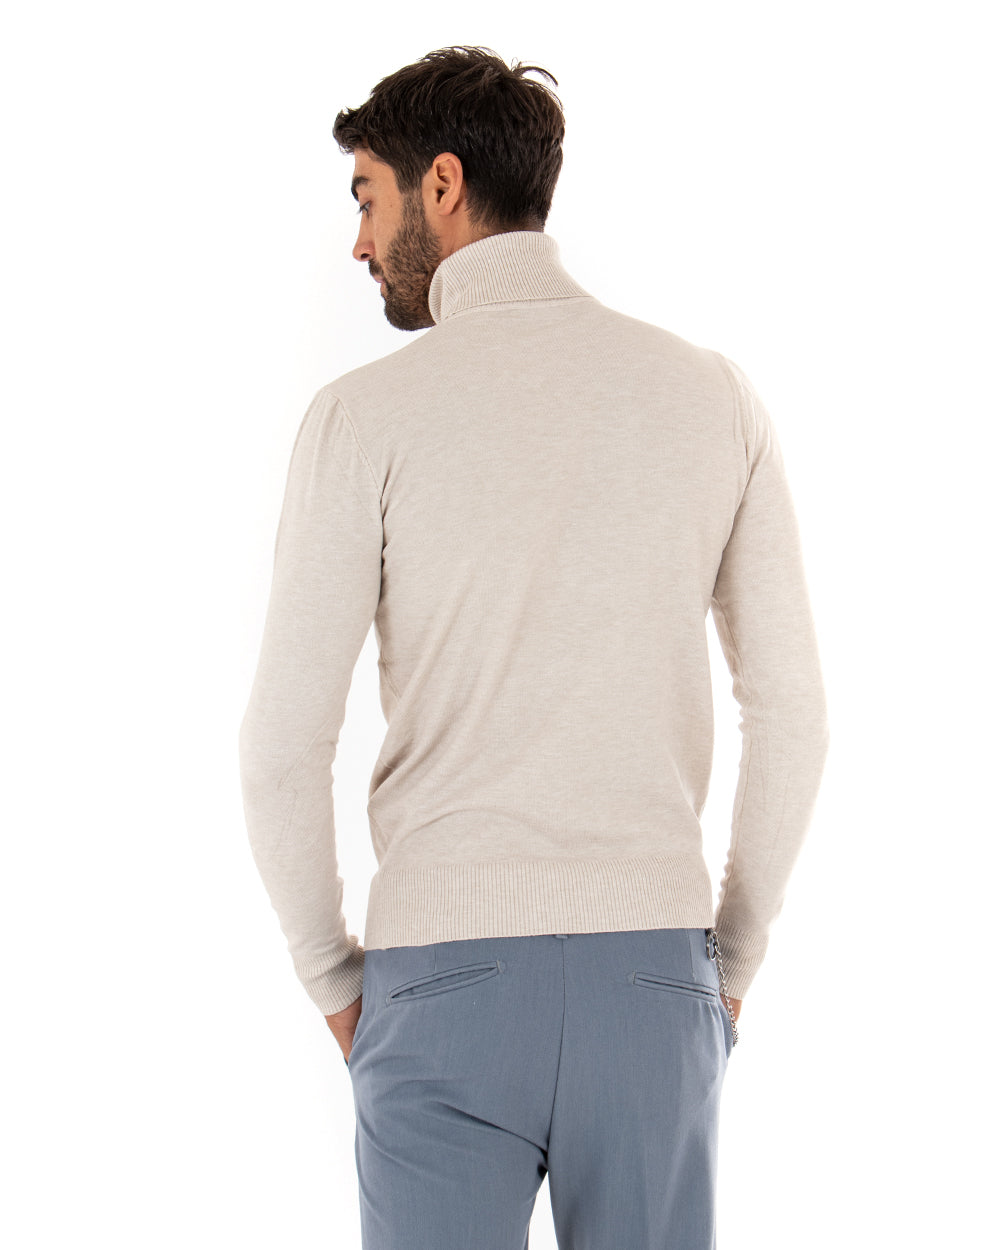 Men's Sweater Long Sleeves Elastic High Neck Solid Color Beige GIOSAL M2542A